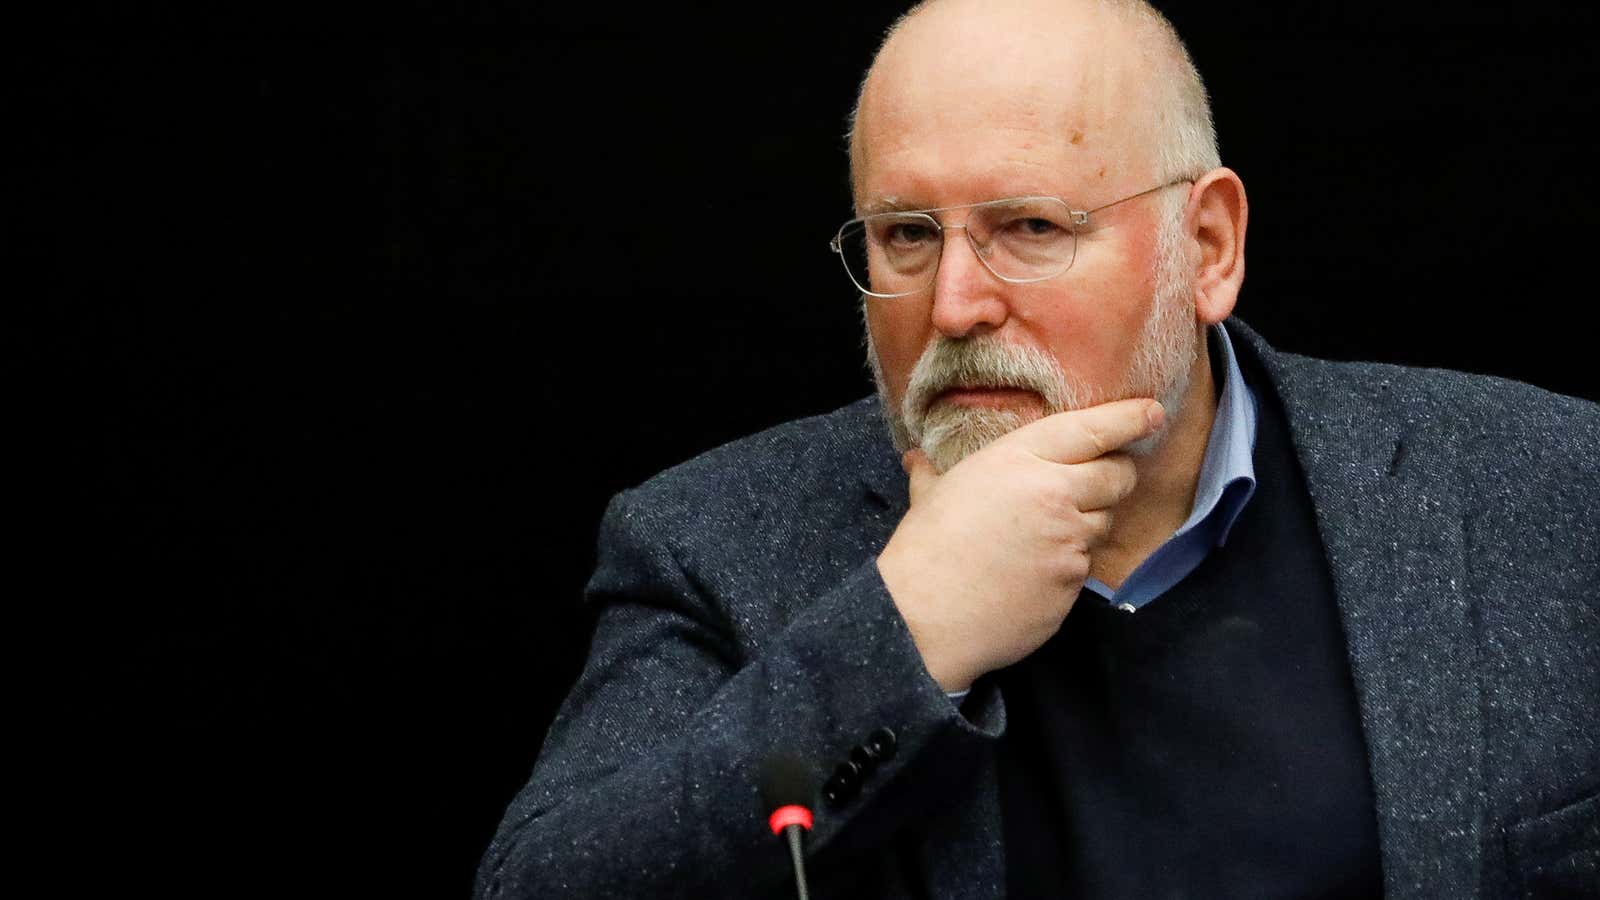 The European Commission&#39;s Frans Timmermans